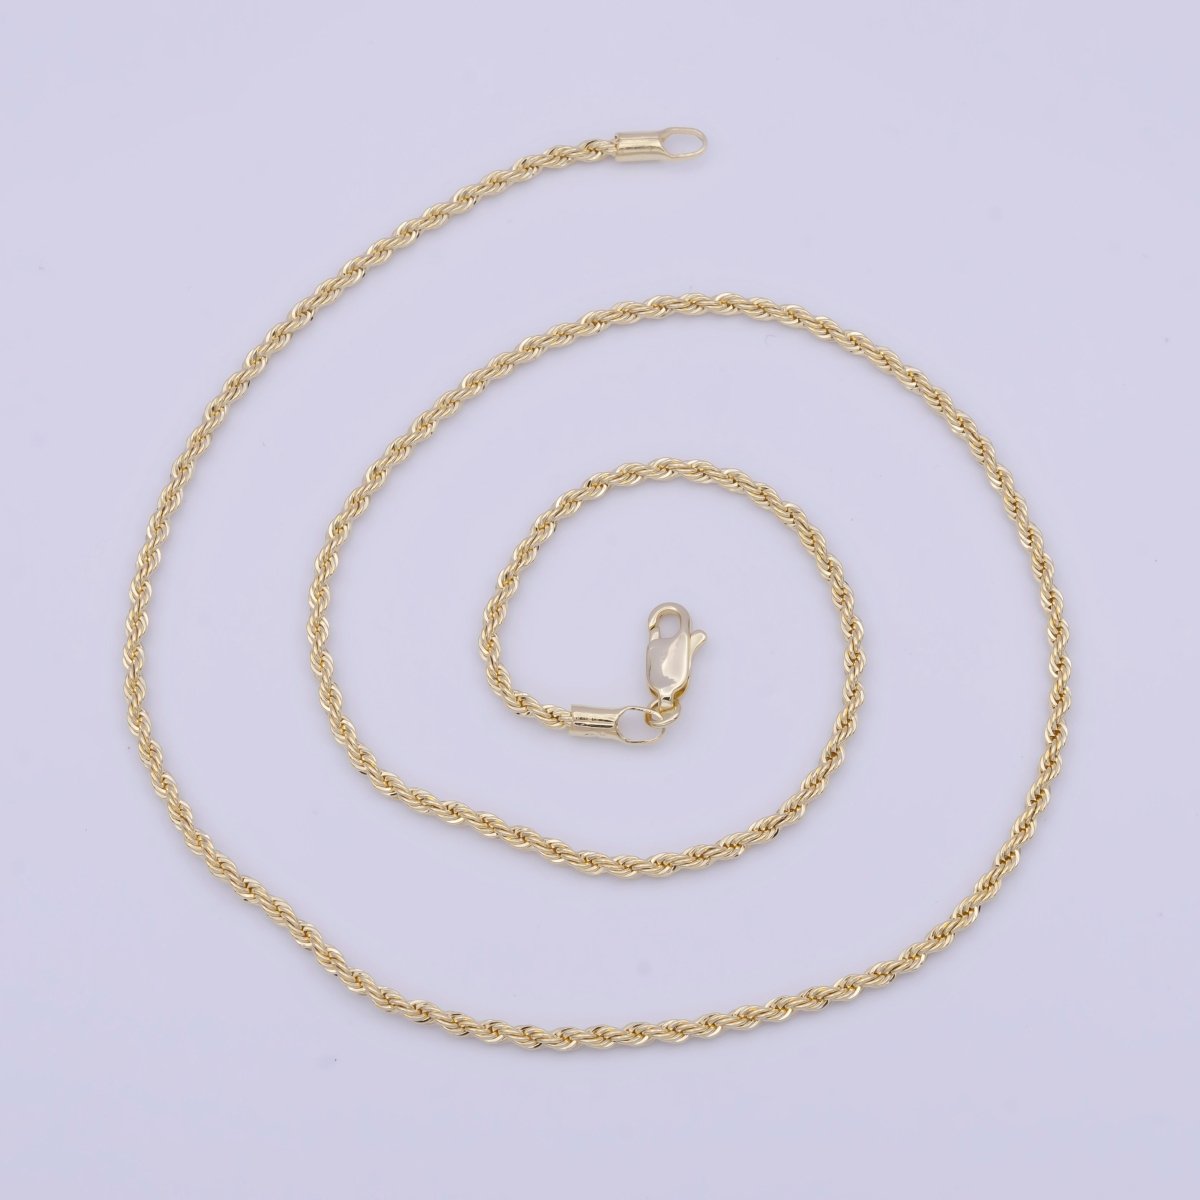 OS Dainty Gold Rope Chain Necklace 17.5 inch for Woman Jewelry Making Supply | WA-1114 Clearance Pricing - DLUXCA